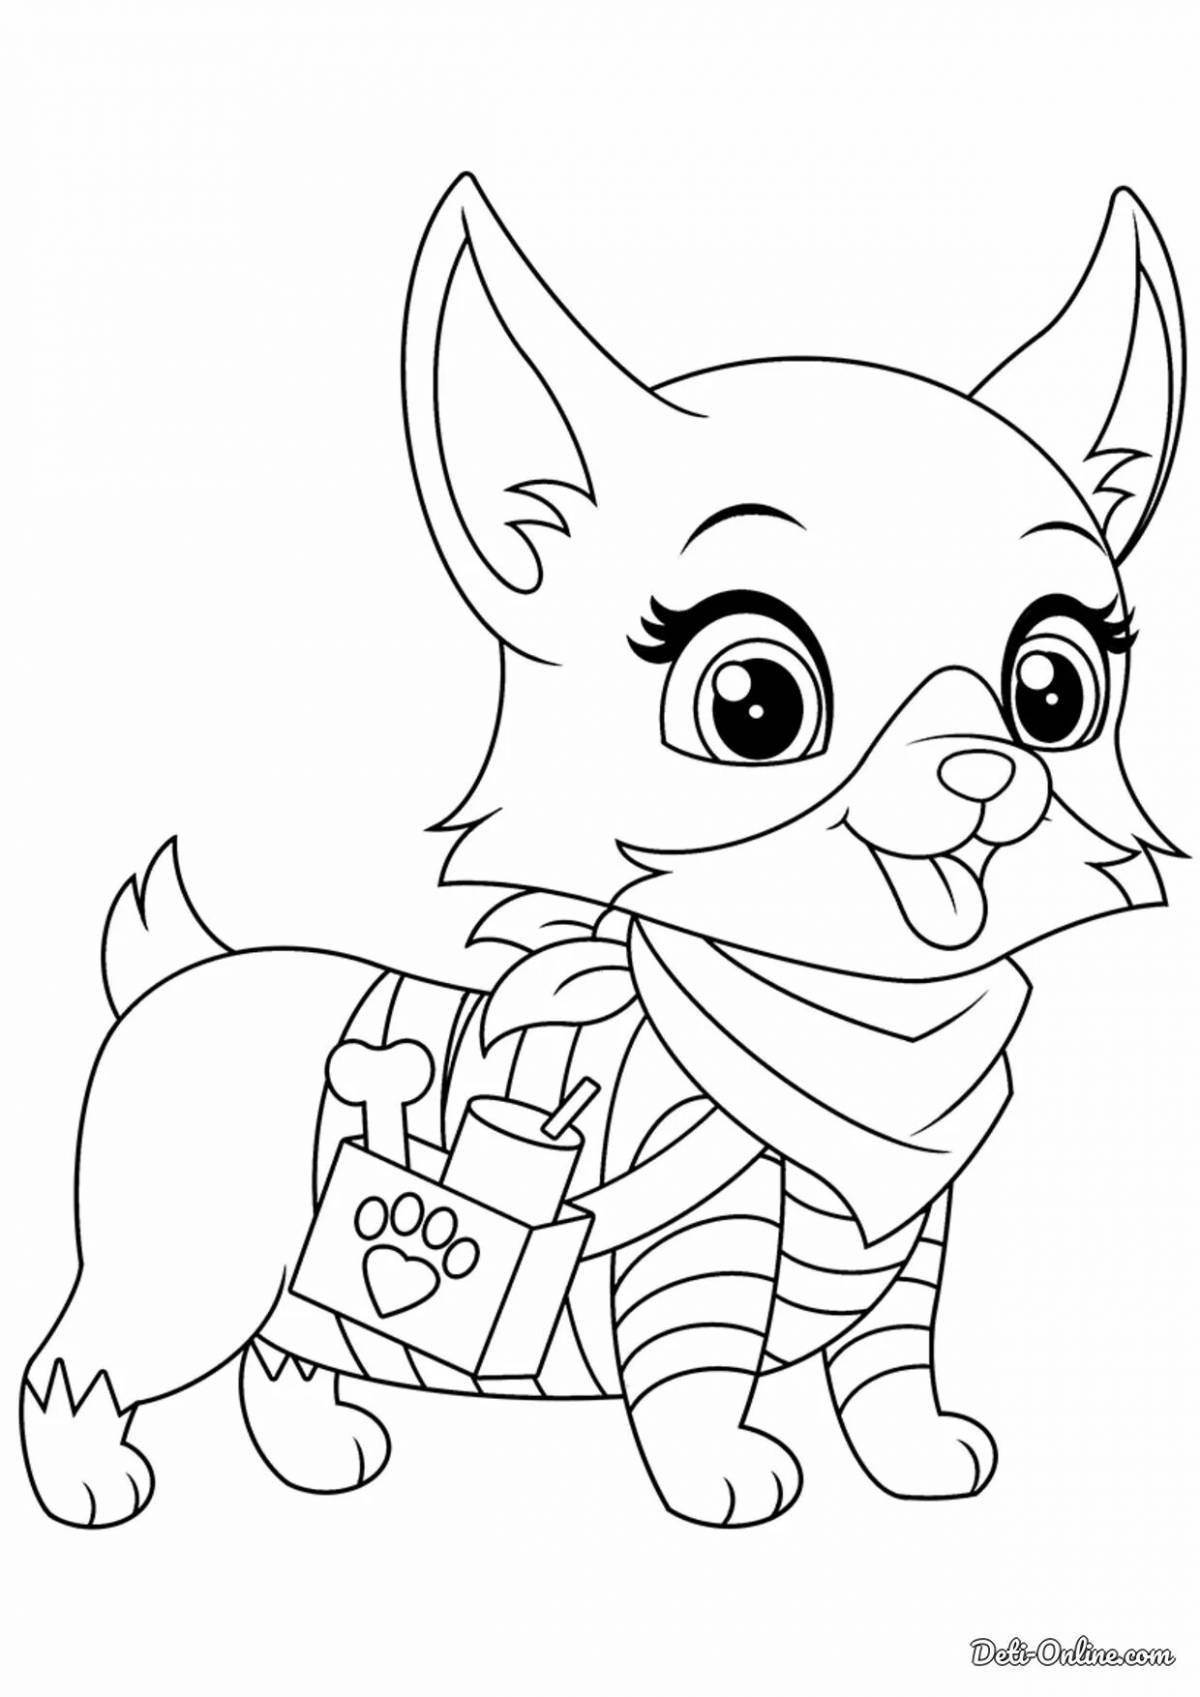 Dan kitty and dogs funny coloring book